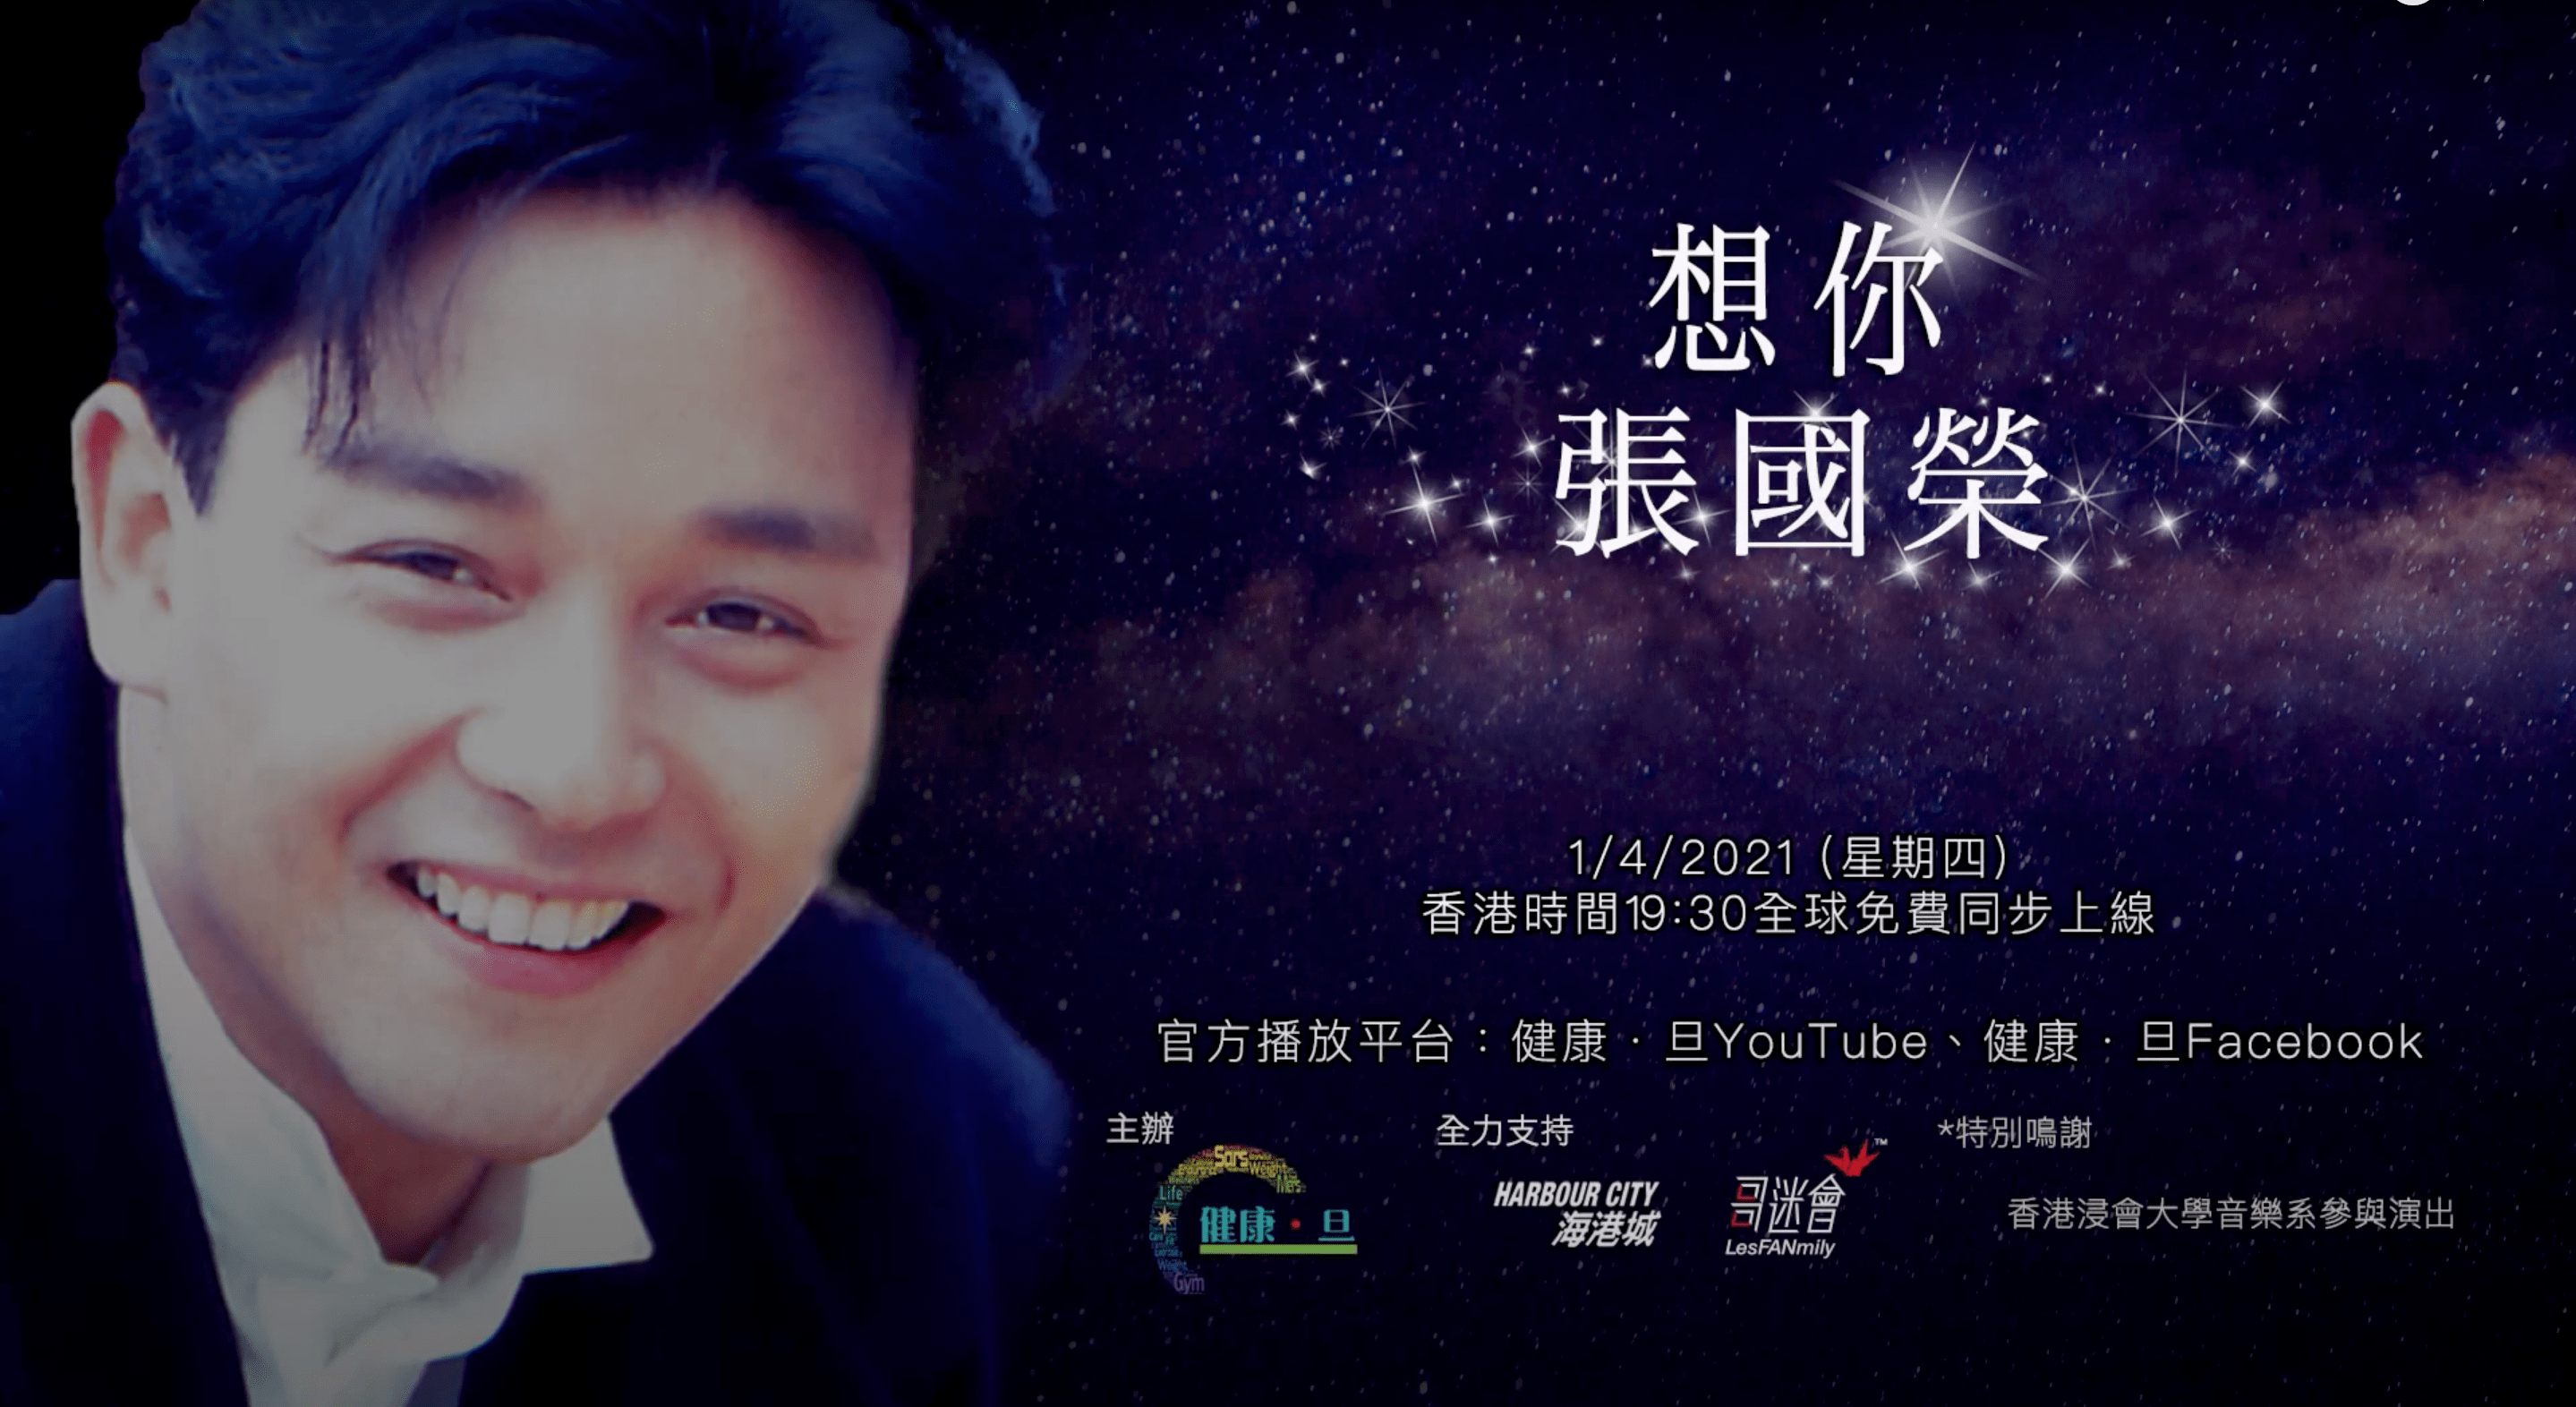 Leslie cheung's memorial online concert to be held on apr 1, features karen mok and more